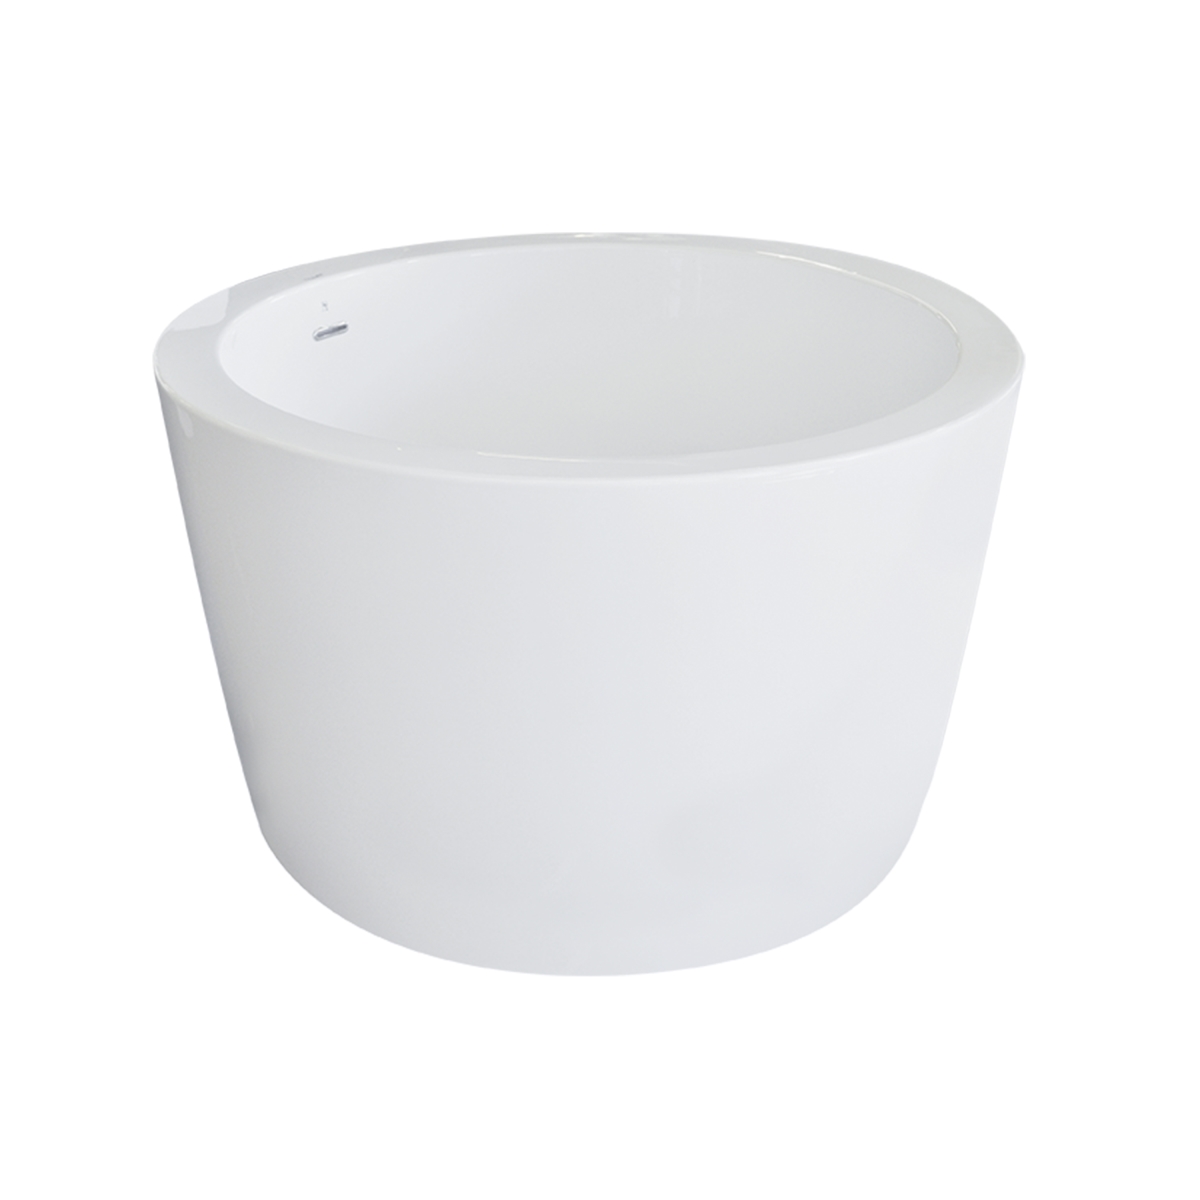 Opeswht Contemporary Round With Molded Seat Freestanding Acrylic Insulated Bath Tub, White - 41 X 41 X 27 In.